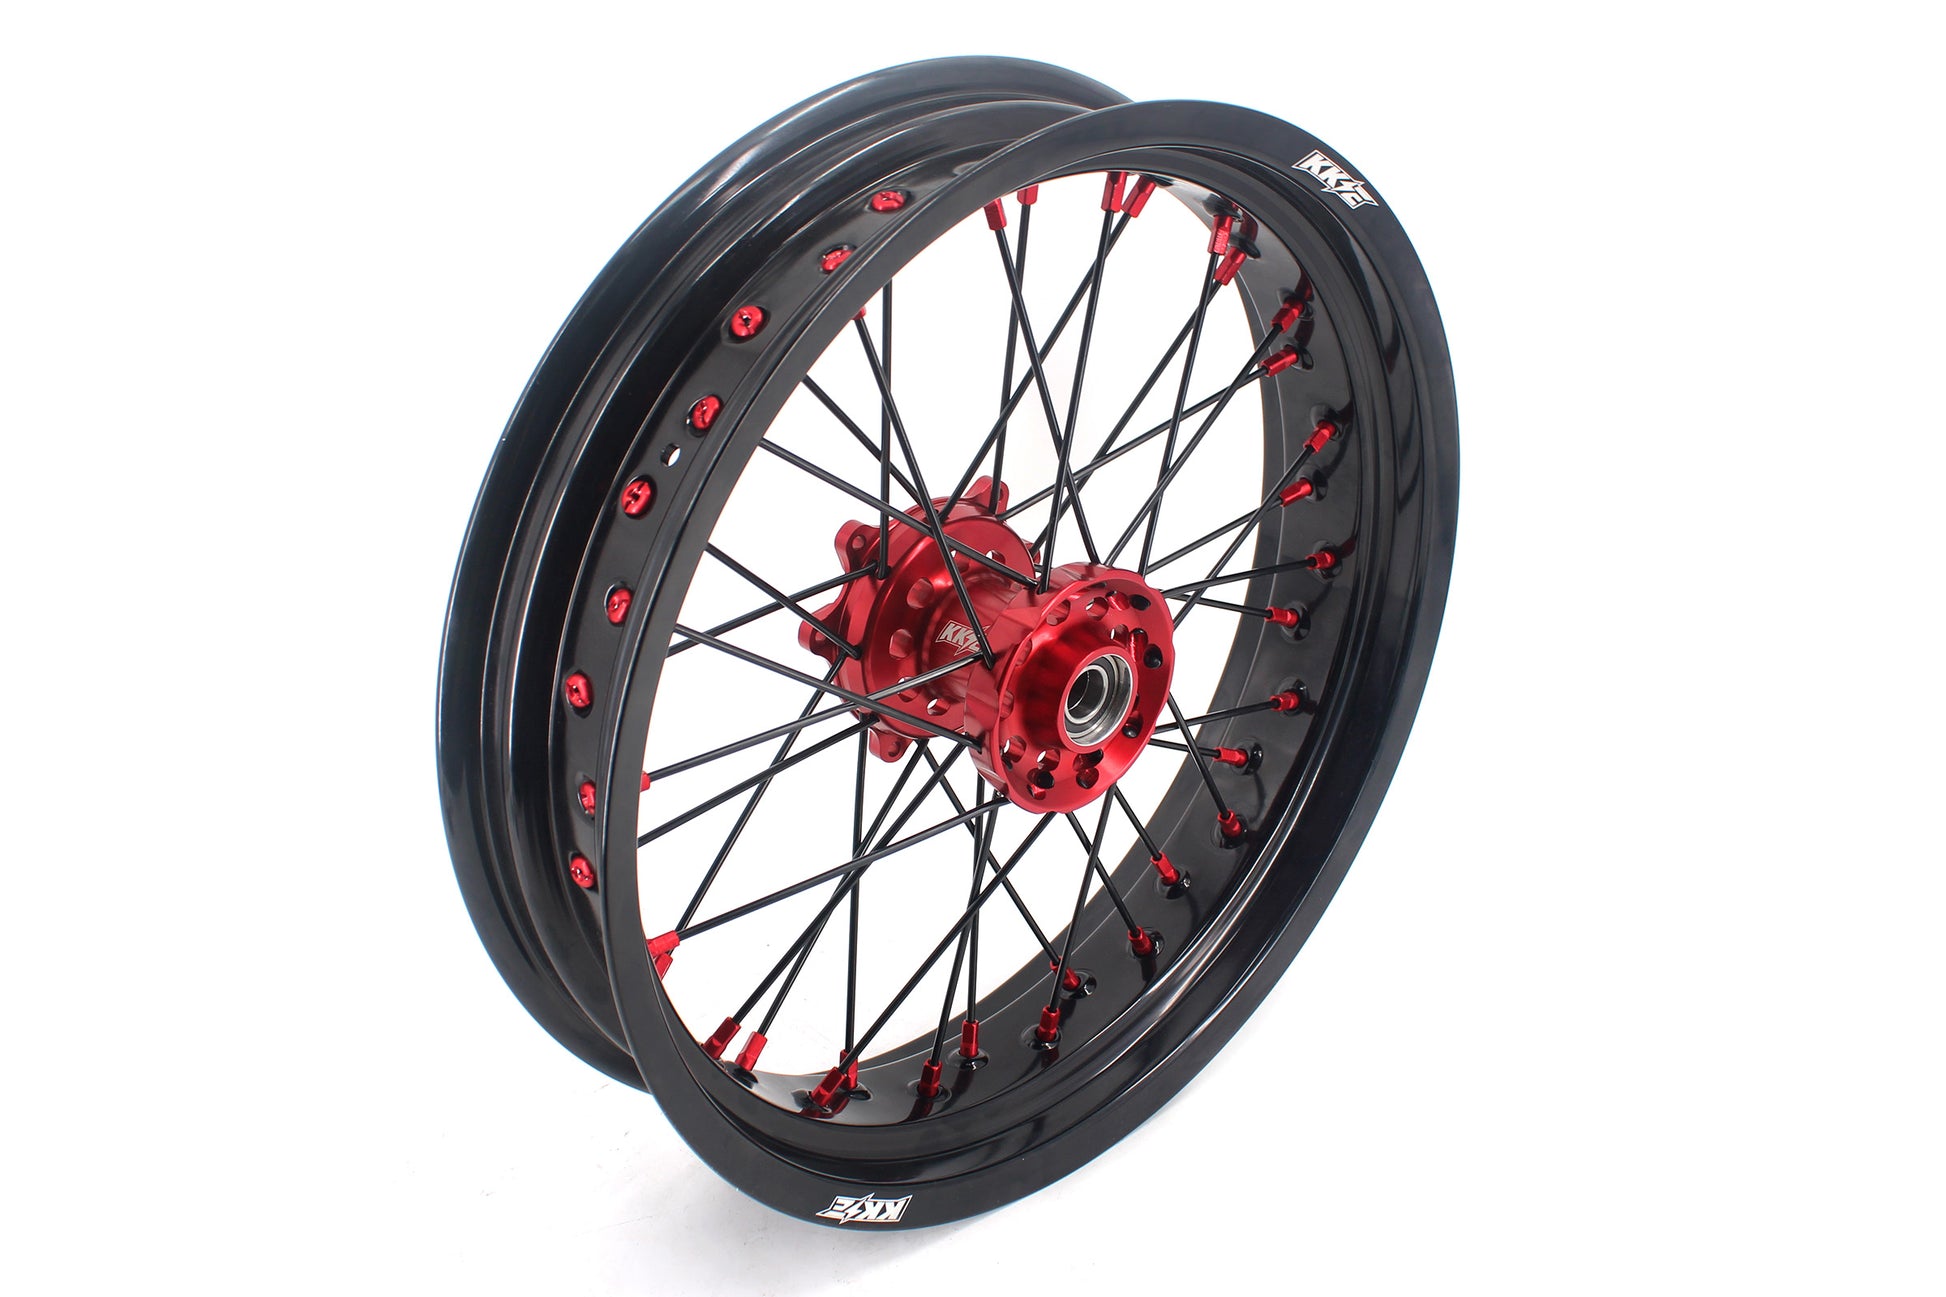 LUSHQ Moto Wheel Rims Spoke Tube Tire tyre Scooter Bike Electric Motorcycle  For ktm exc couvre rayon moto honda crf 250 ktm sx - Price history & Review